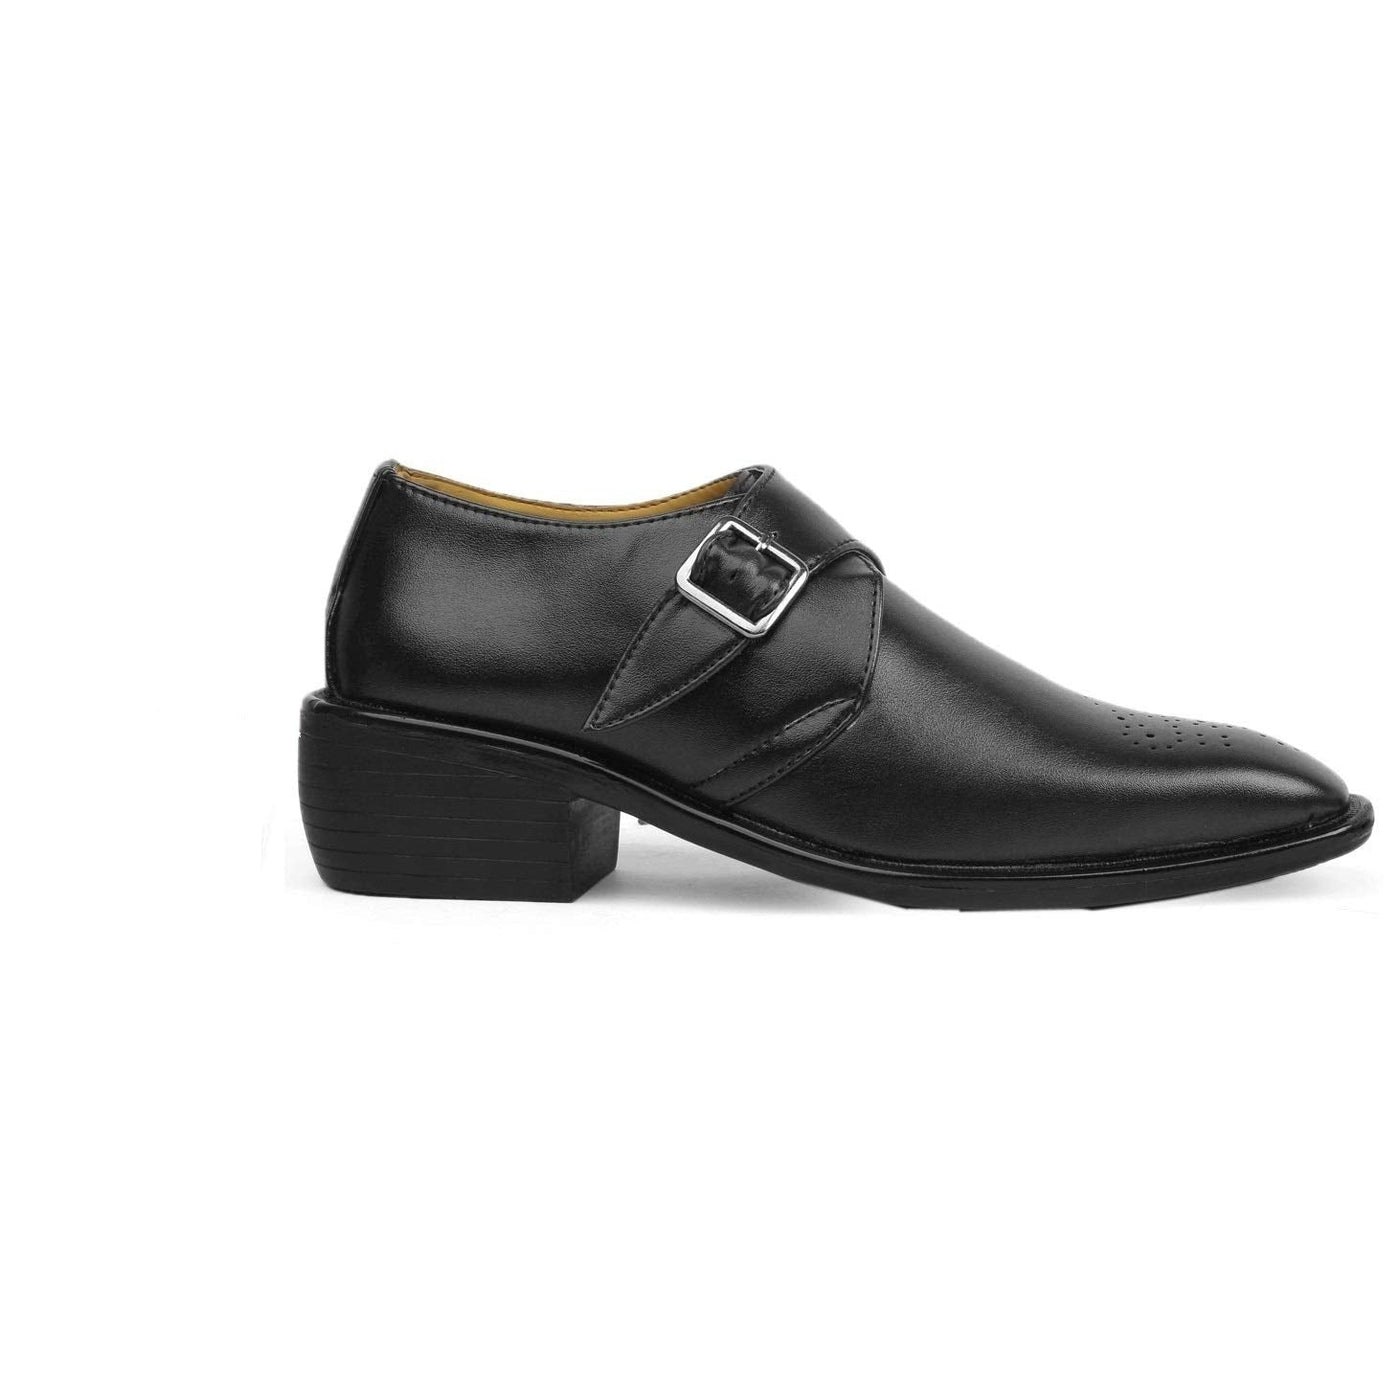 Classy Casual And Formal Black Moccasin Monk Slip-on Shoes For Men-Unique and Classy